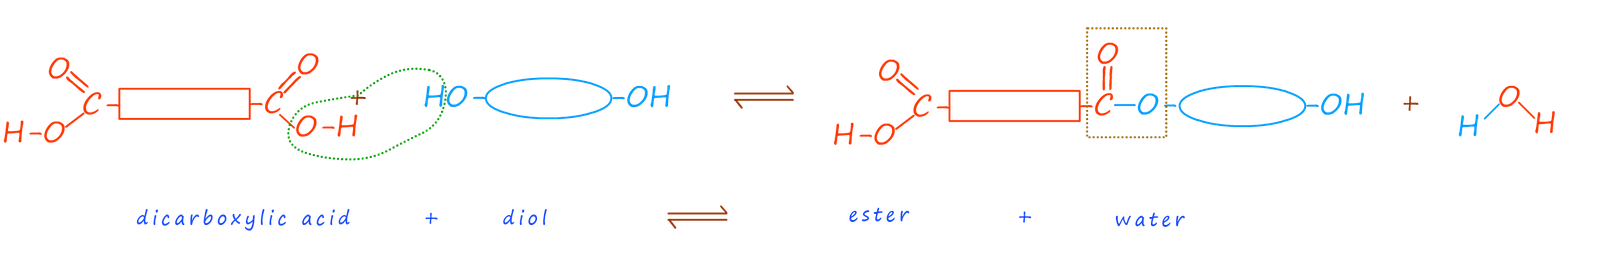 polyester formation using a diol and a diacid